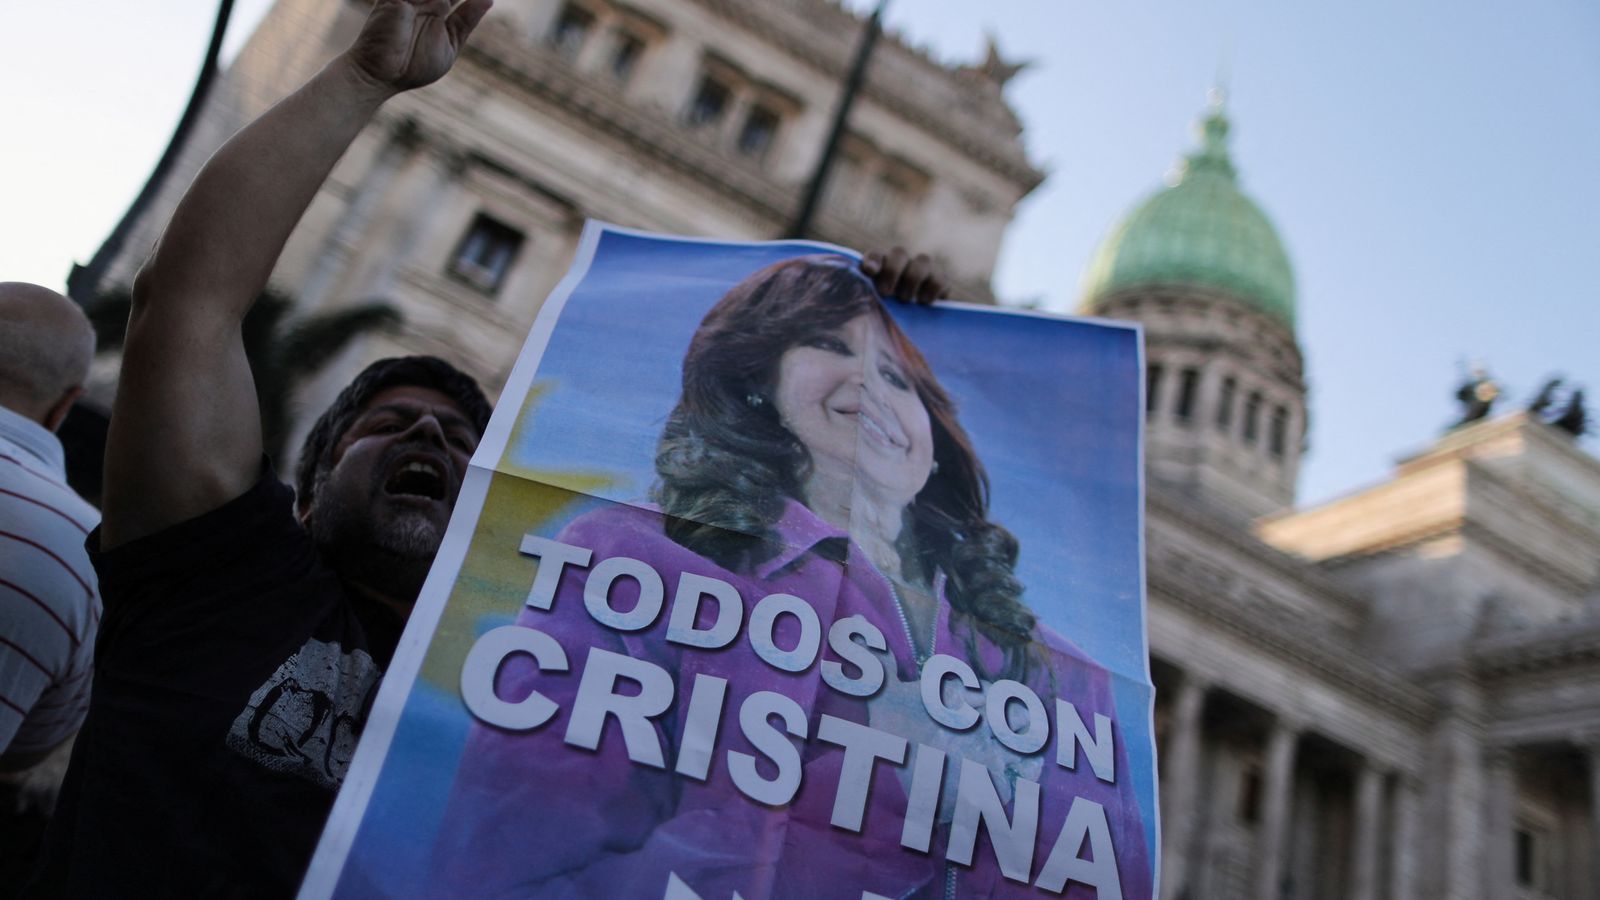 Argentina's vice president Cristina Fernandez de Kirchner jailed for corruption - but won't actually go behind bars